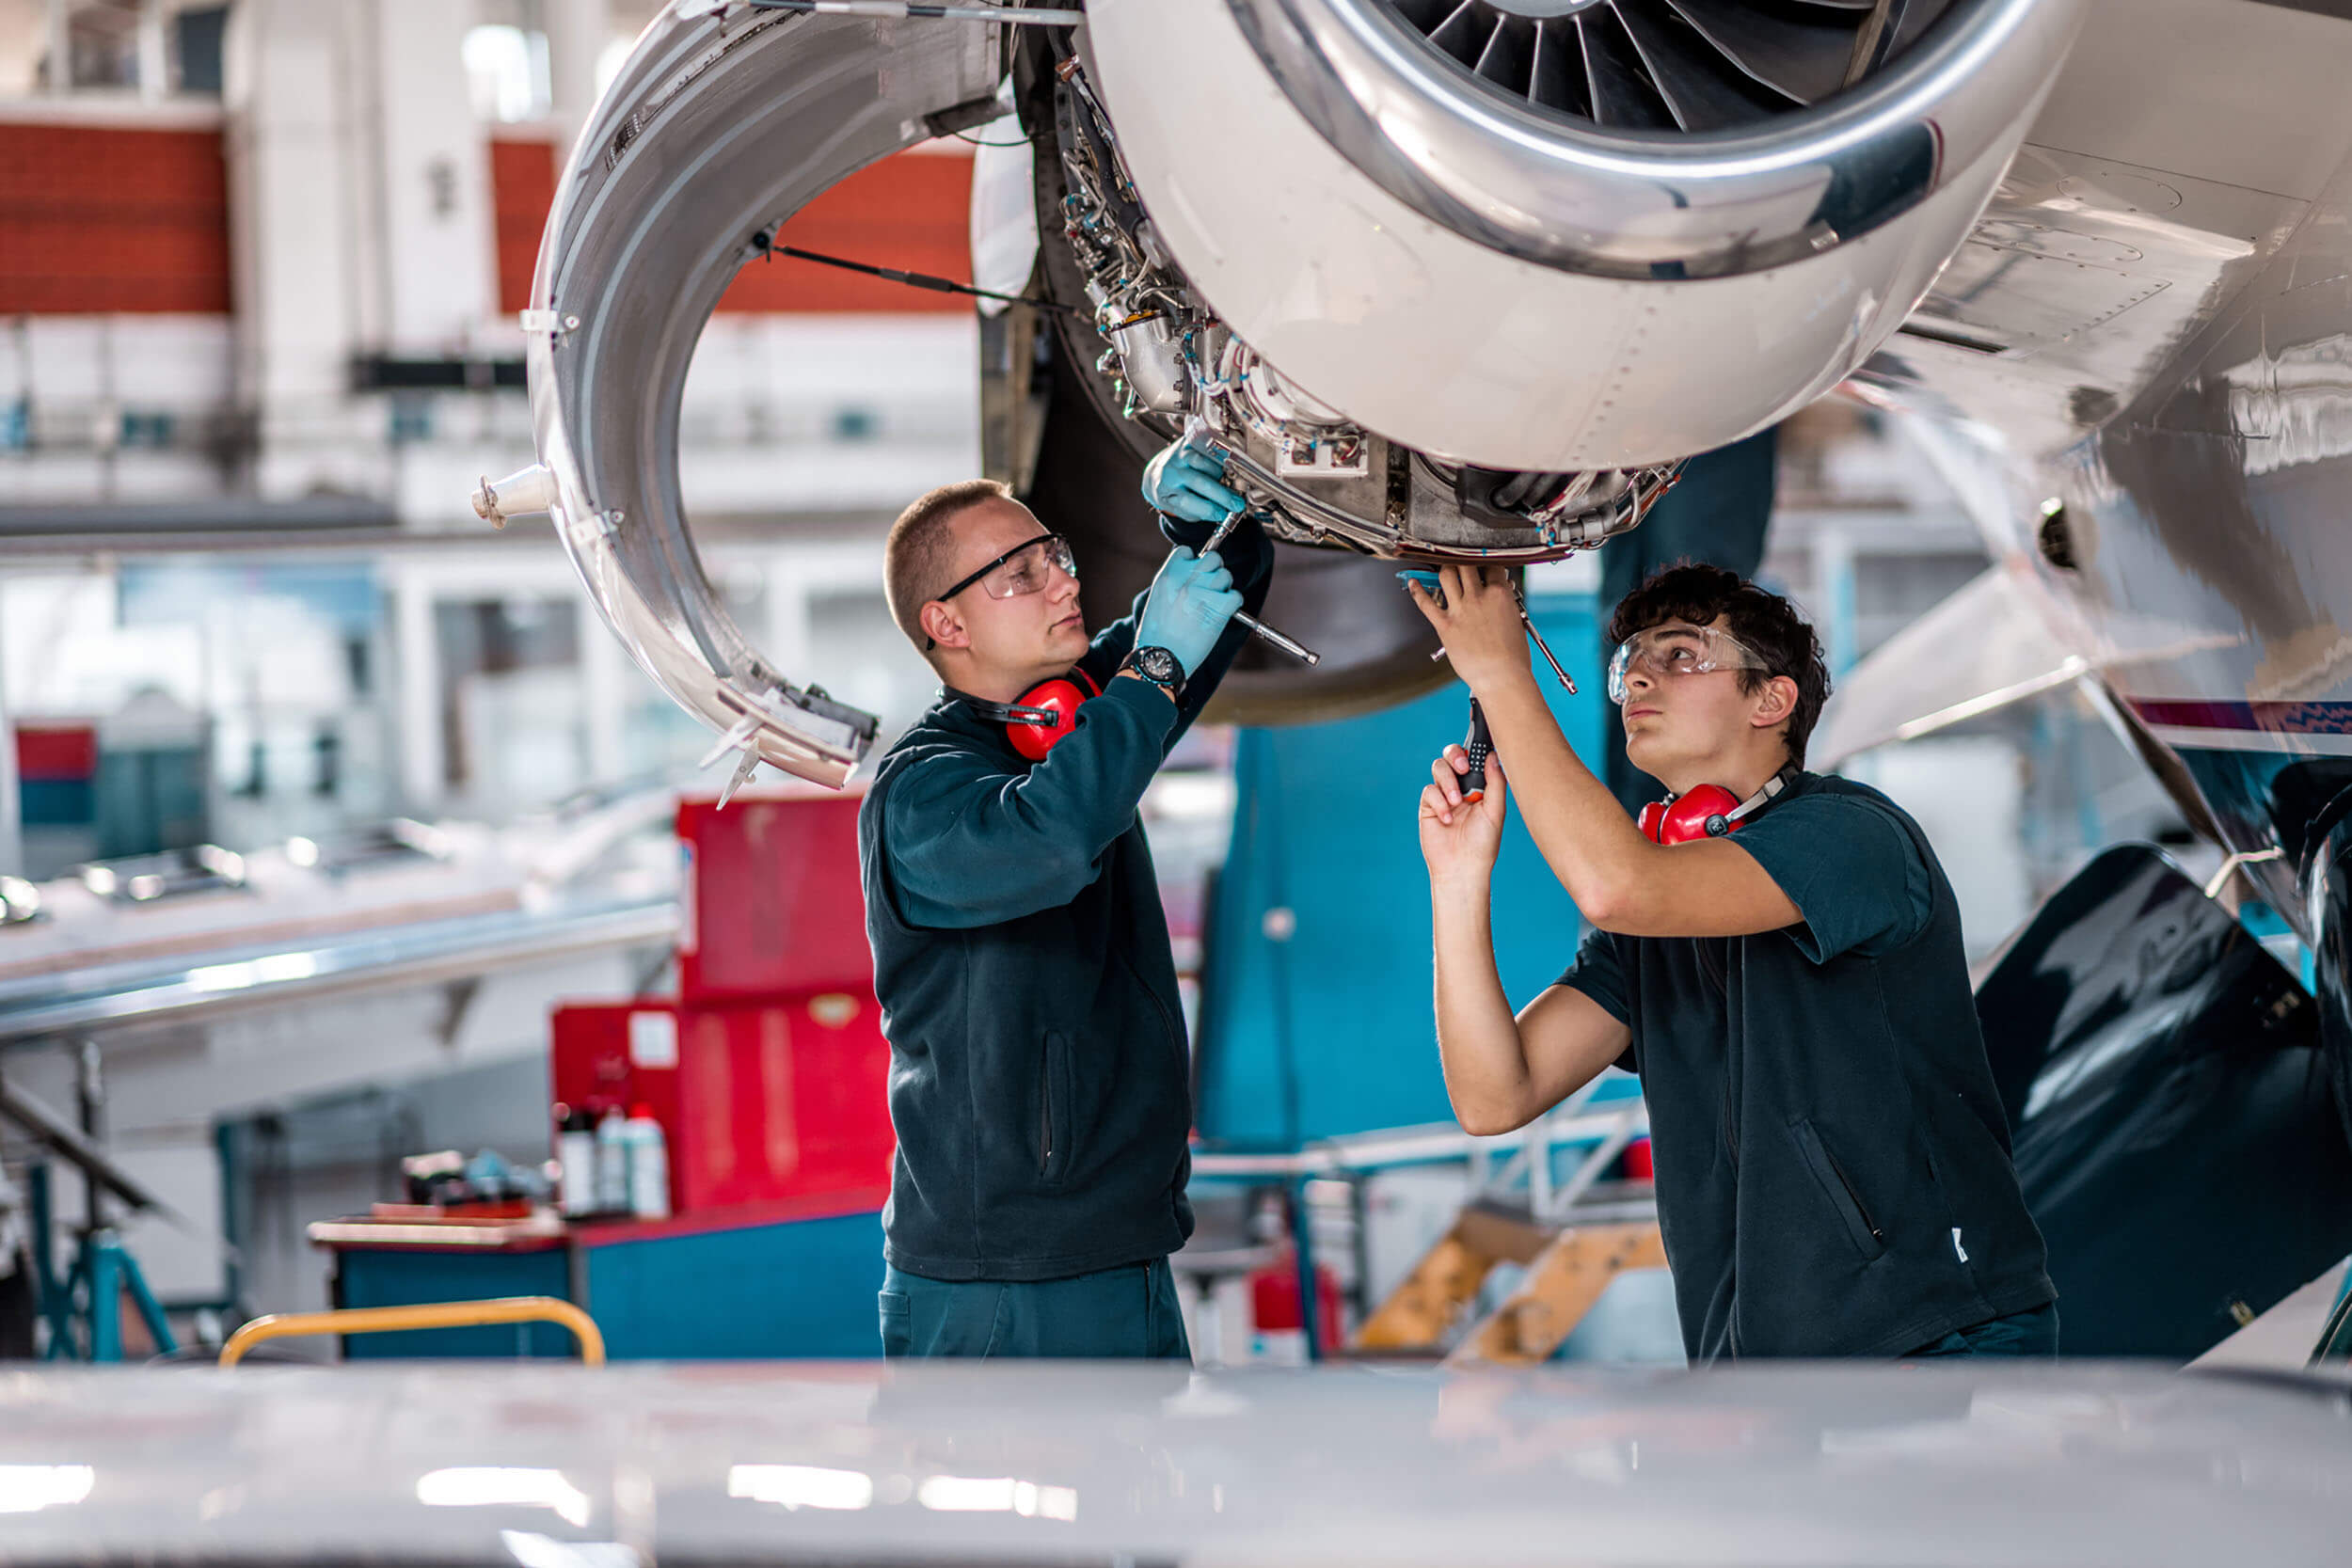 Two male aircraft maintenance mechanics inspect and check an airplane jet engine in the airport hangar.